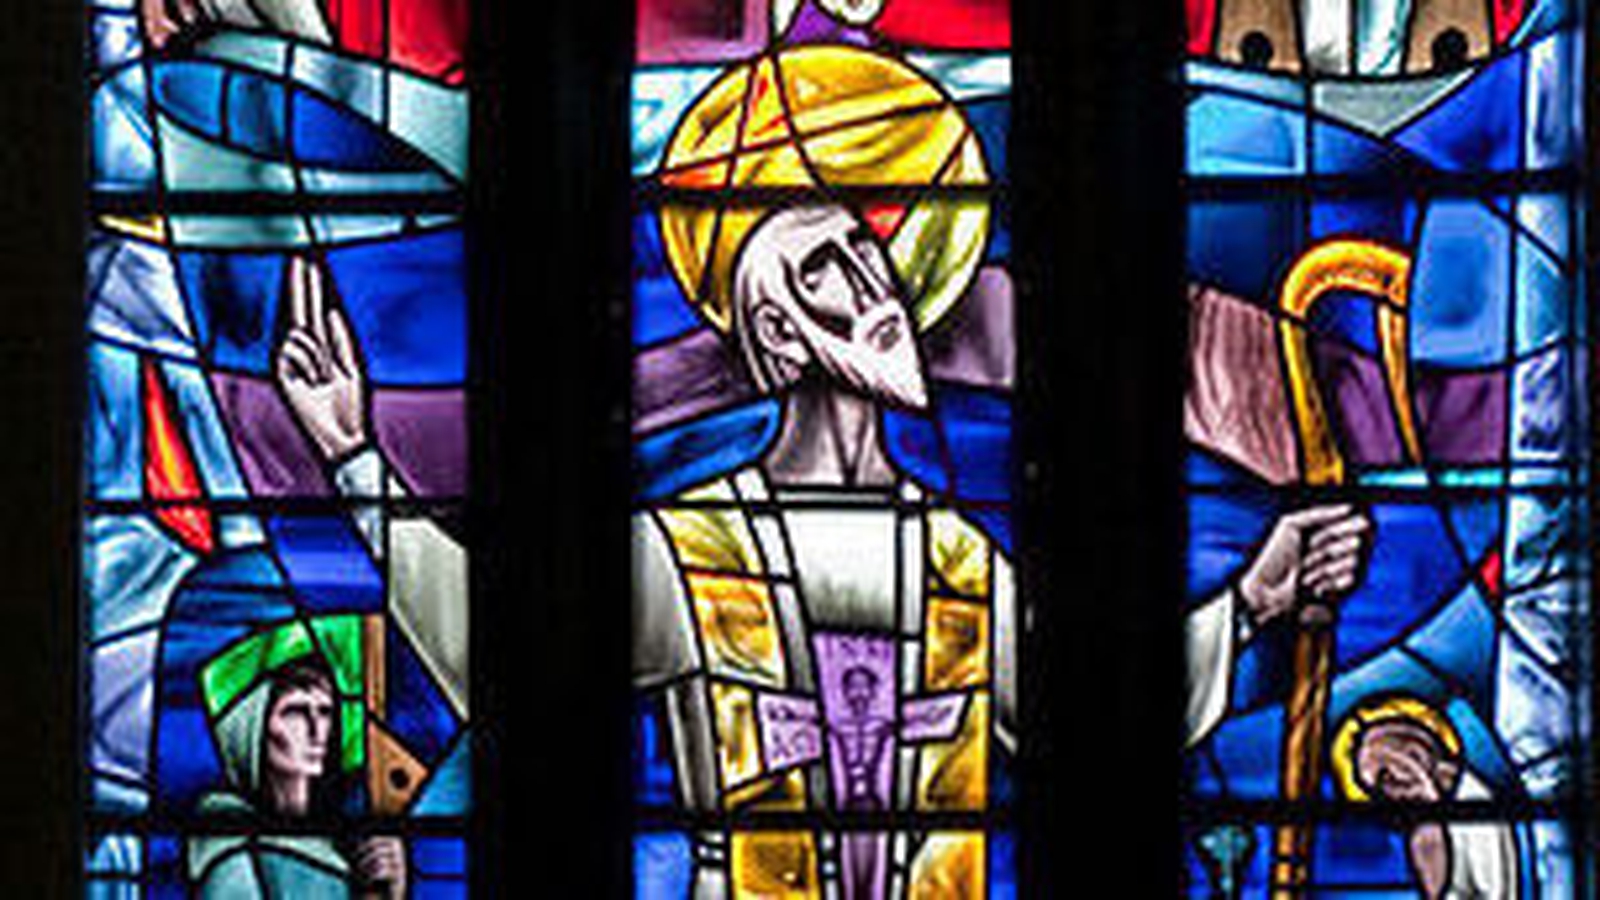 Medieval stained glass - Wikipedia